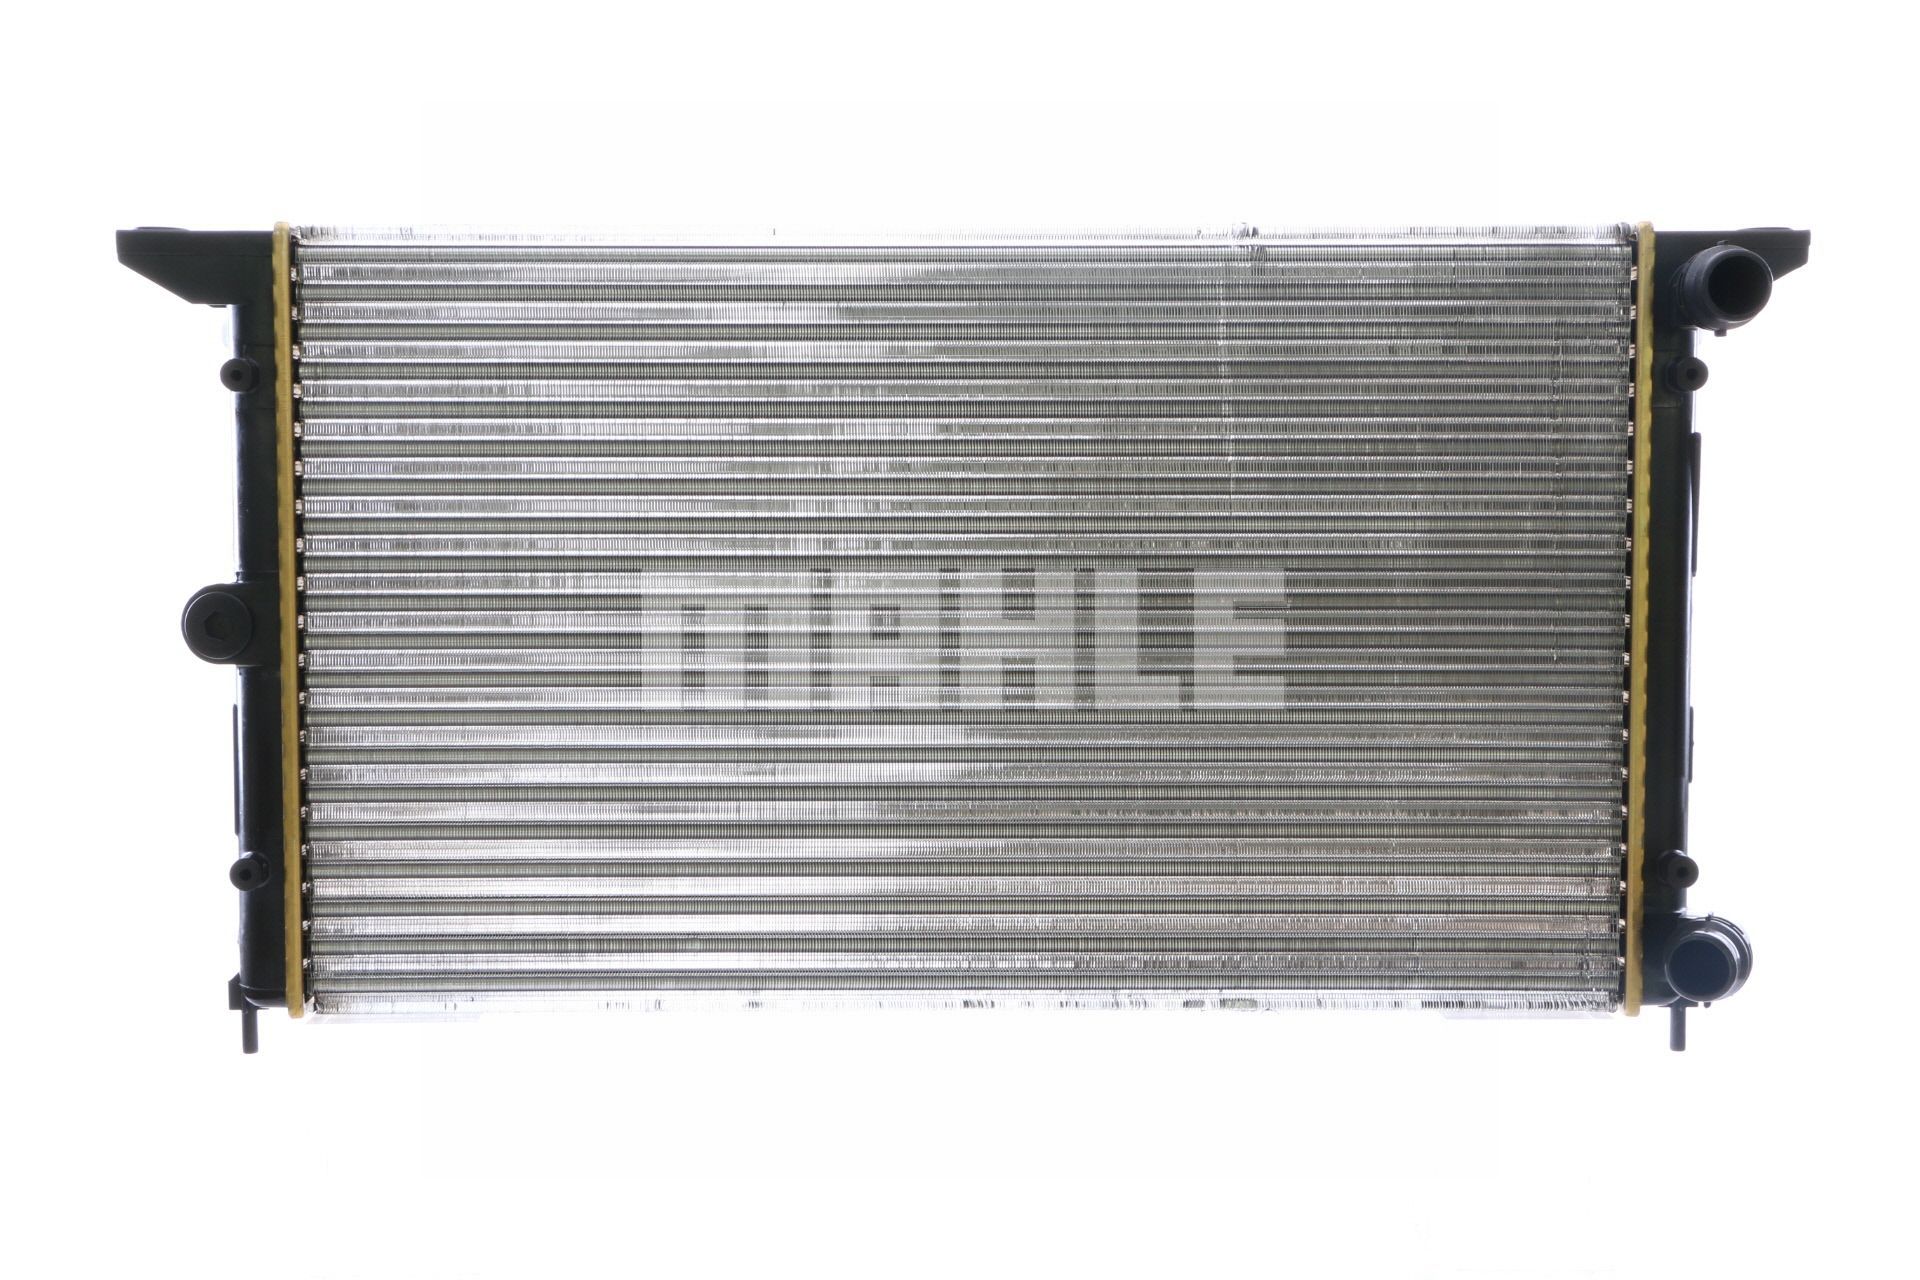 CR 641 000S MAHLE ORIGINAL Radiators FORD for vehicles with/without air conditioning, 635 x 366 x 34 mm, with screw, Automatic Transmission, Manual Transmission, Mechanically jointed cooling fins